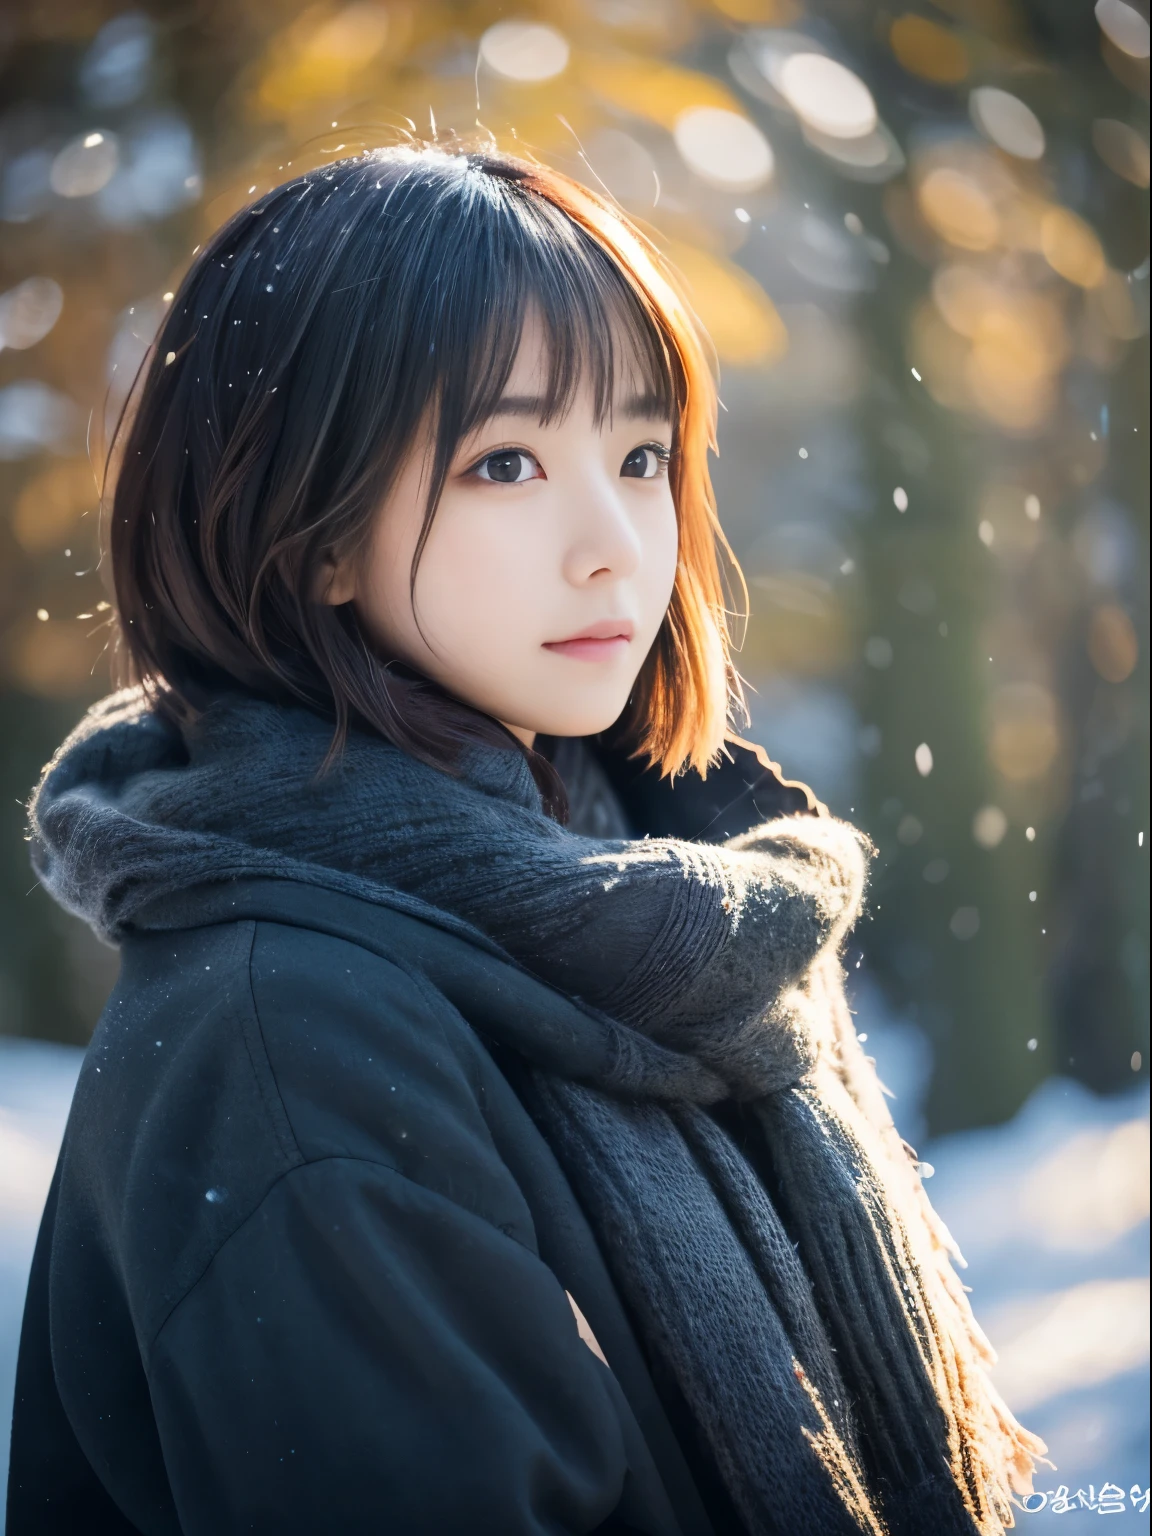 top-quality、​masterpiece、超A high resolution、Raw photography、(Photorealsitic:1.4)、1 girl、While watching the snow falling quietly. Her introspective and tearful expression、Makes you feel longing and melancholy for winter nights。。。。。。。。、top-quality、hyper HD、Yoshitomo Nara, Japanese Models, Beautiful Japan wife, With short hair, 27yo female model, 4 K ], 4K], 27yo, sakimichan, sakimichan